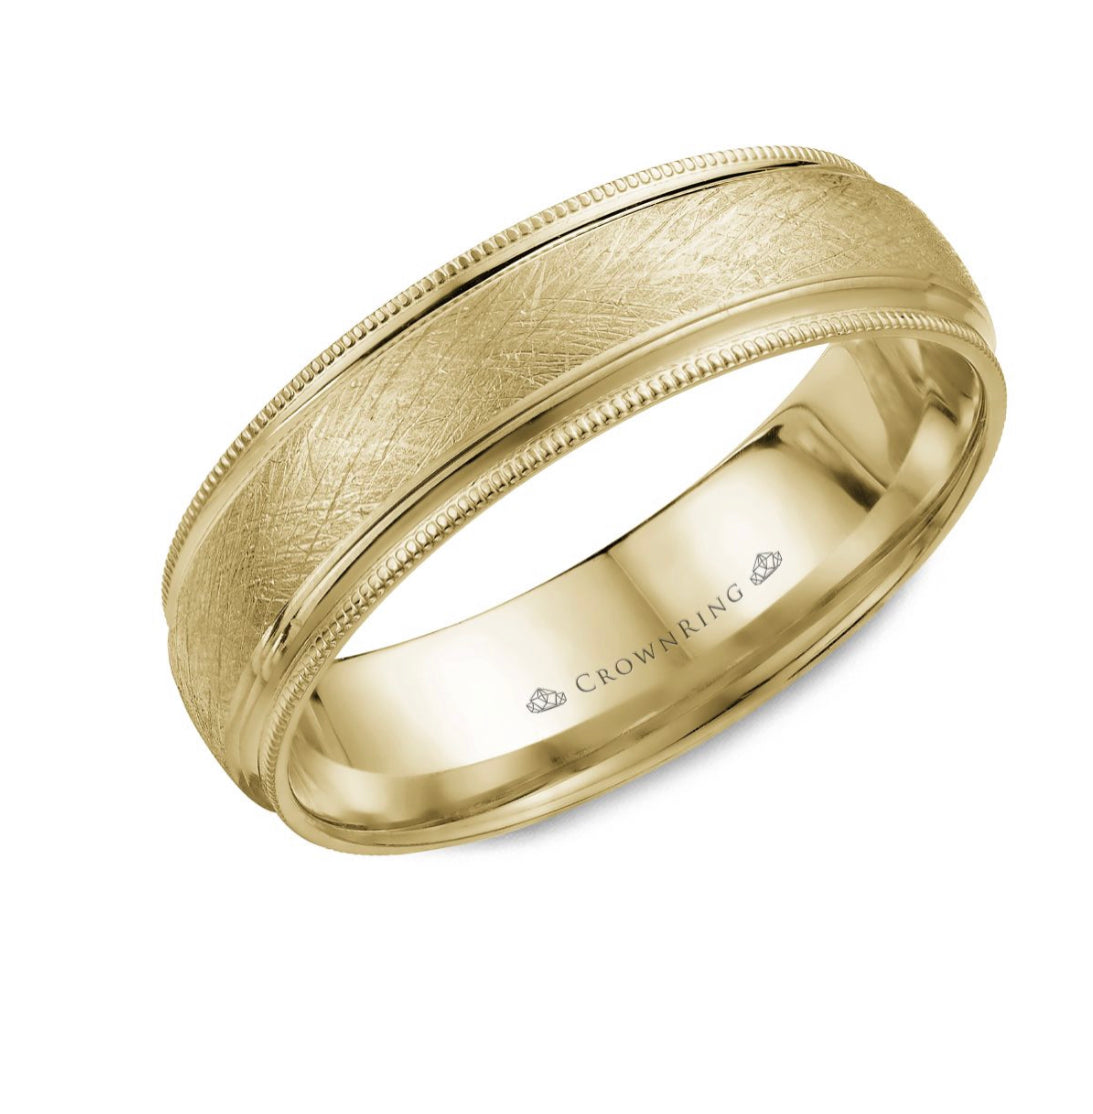 CrownRing Collection - 14k Yellow Gold 6mm with textured Center and Milgrain Edge.